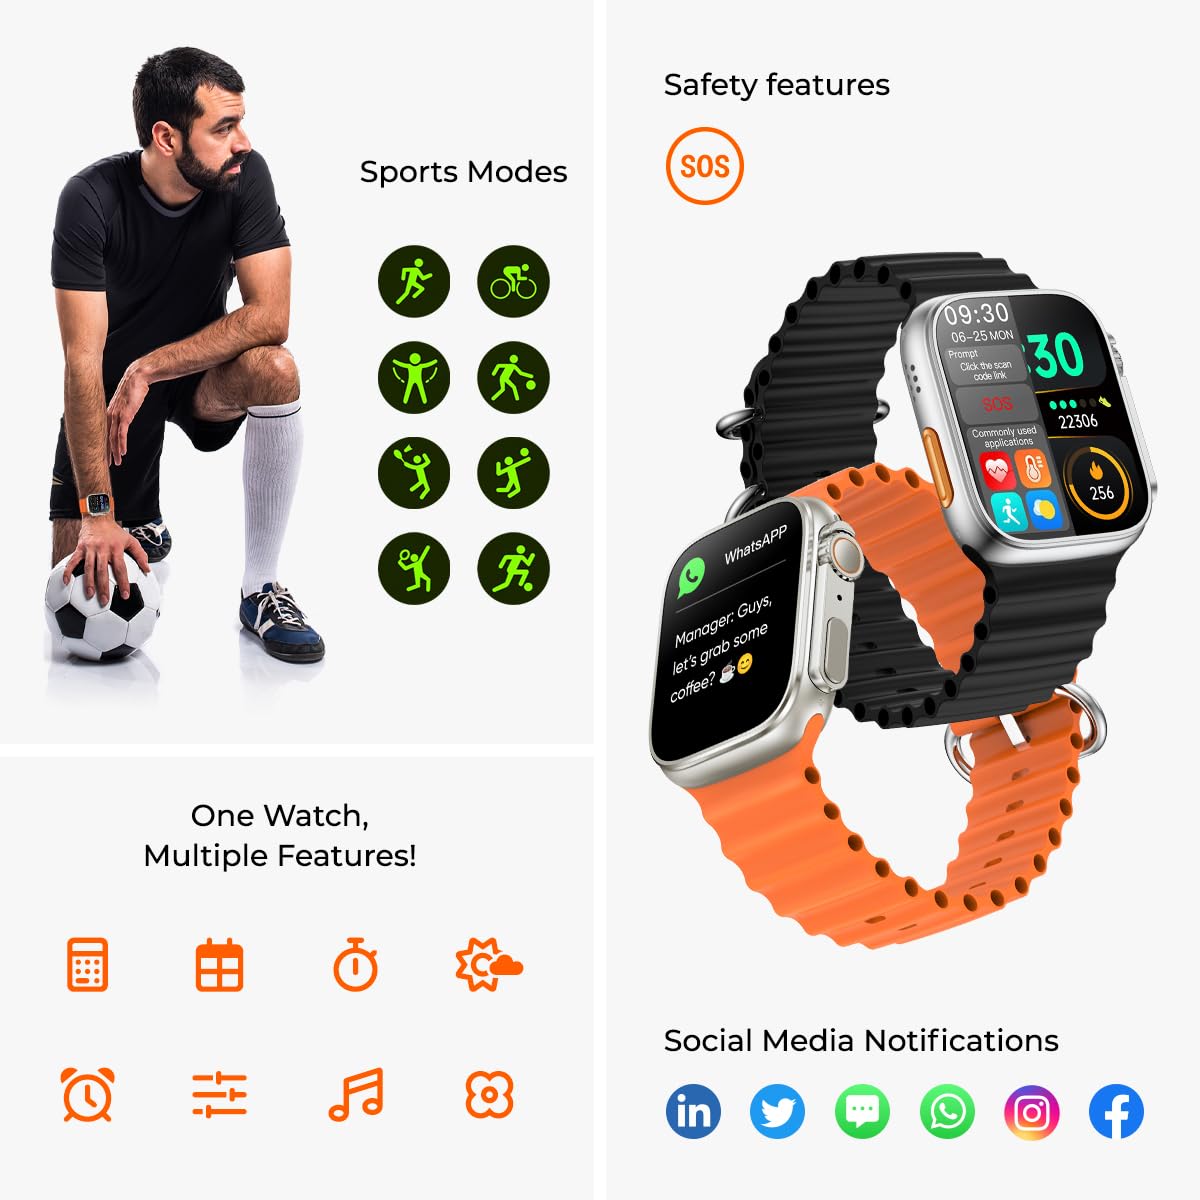 pTron Newly Launched Reflect Pro Smartwatch, Bluetooth Calling, 1.85" Full Touch Display, 600 NITS, Digital Crown, Metal Frame, 100+ Watch Faces, HR, SpO2, Voice Assist, 5 Days Battery Life (Black)